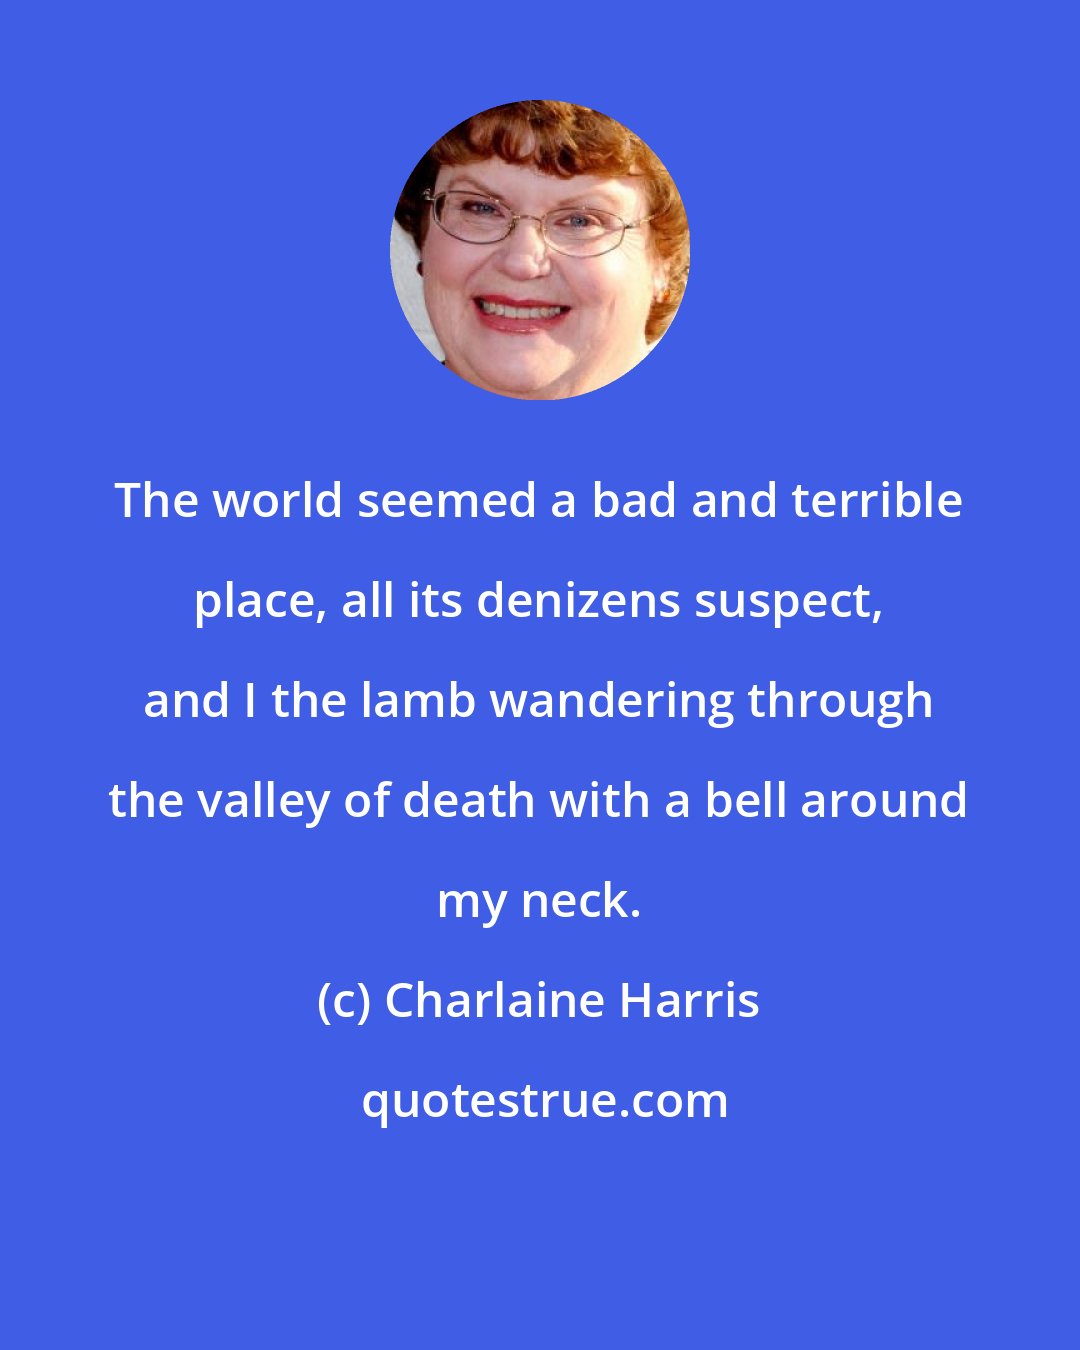 Charlaine Harris: The world seemed a bad and terrible place, all its denizens suspect, and I the lamb wandering through the valley of death with a bell around my neck.